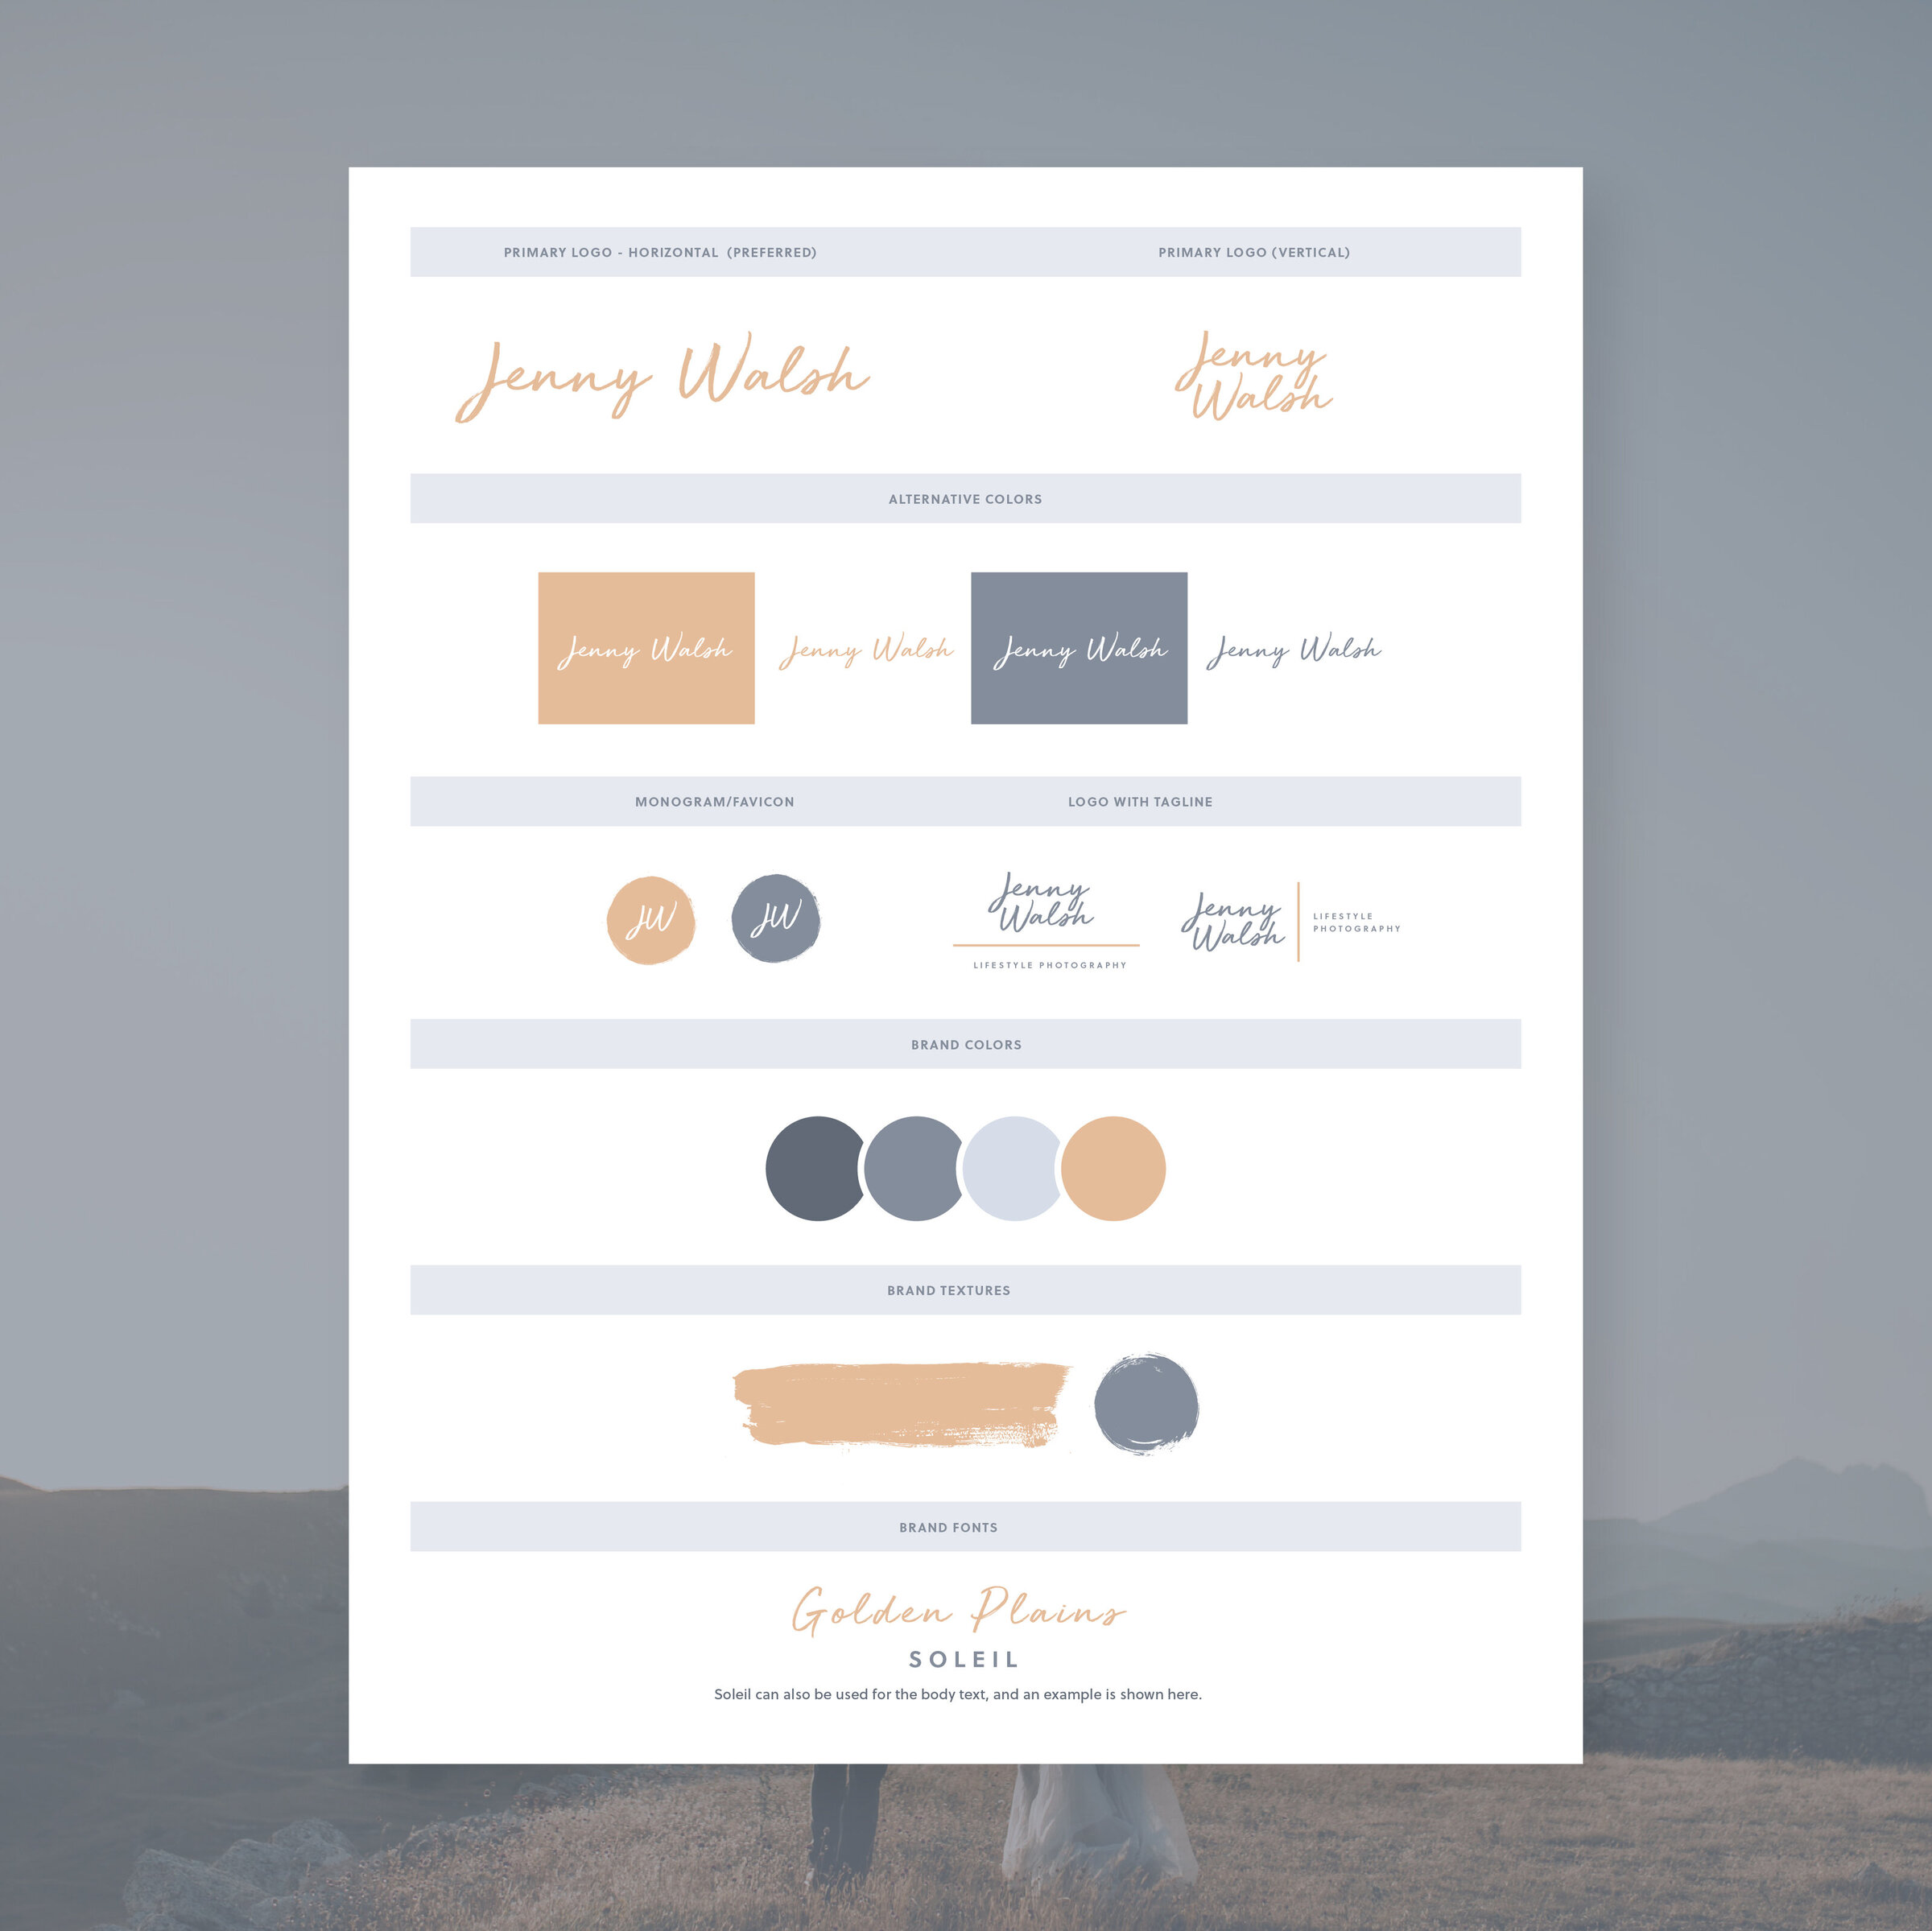 Brand board for jenny walsh photography